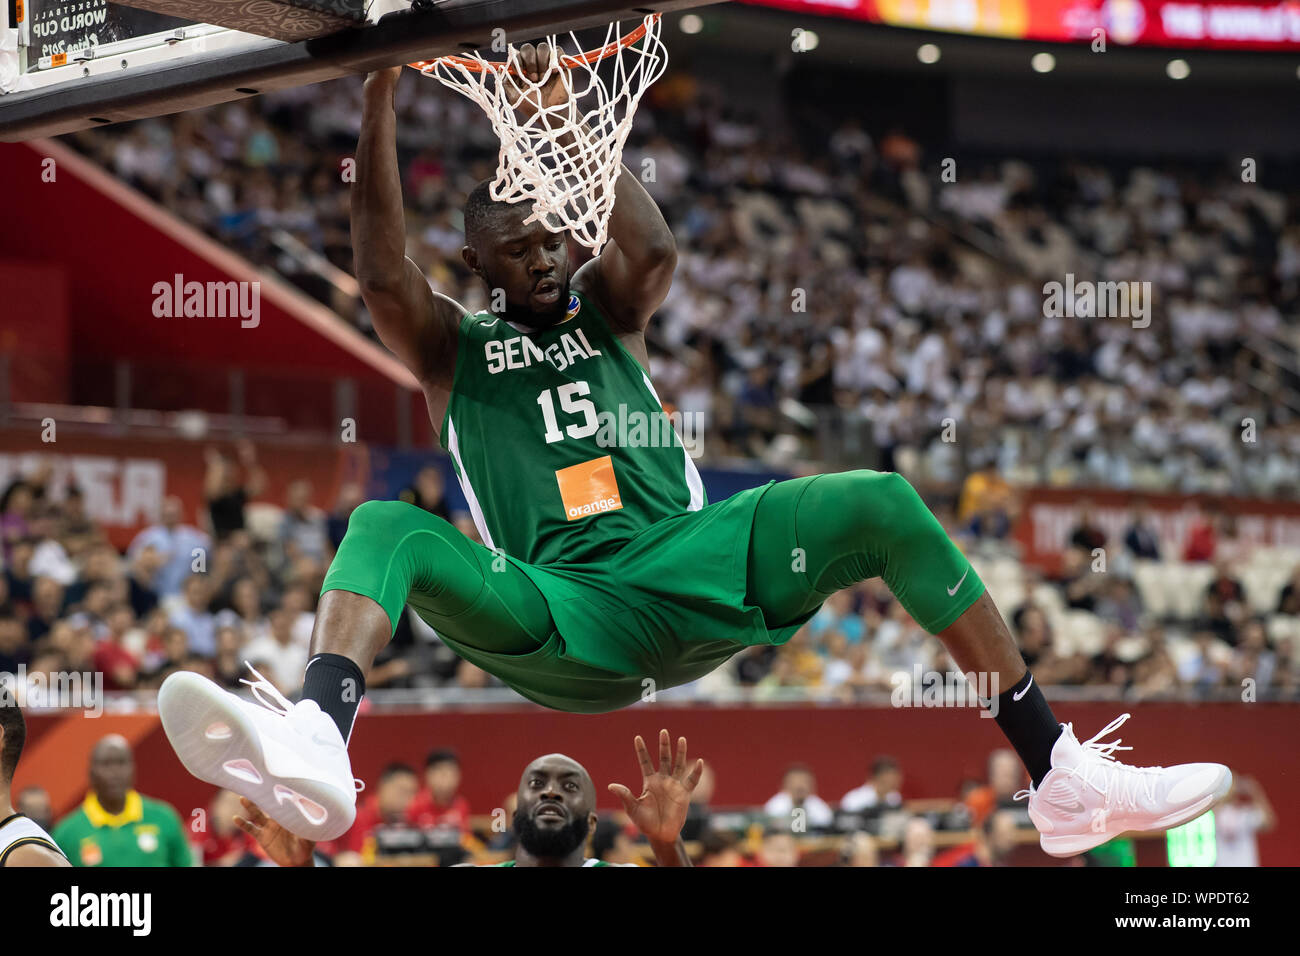 Shanghai, China. 09th Sep, 2019. Basketball: World Cup, Jordan - Senegal,  placement round at Oriental Sports Center. Senegal's Youssoupha Ndoye is  hanging on the basket after a dunking. Credit: Swen Pförtner/dpa/Alamy Live